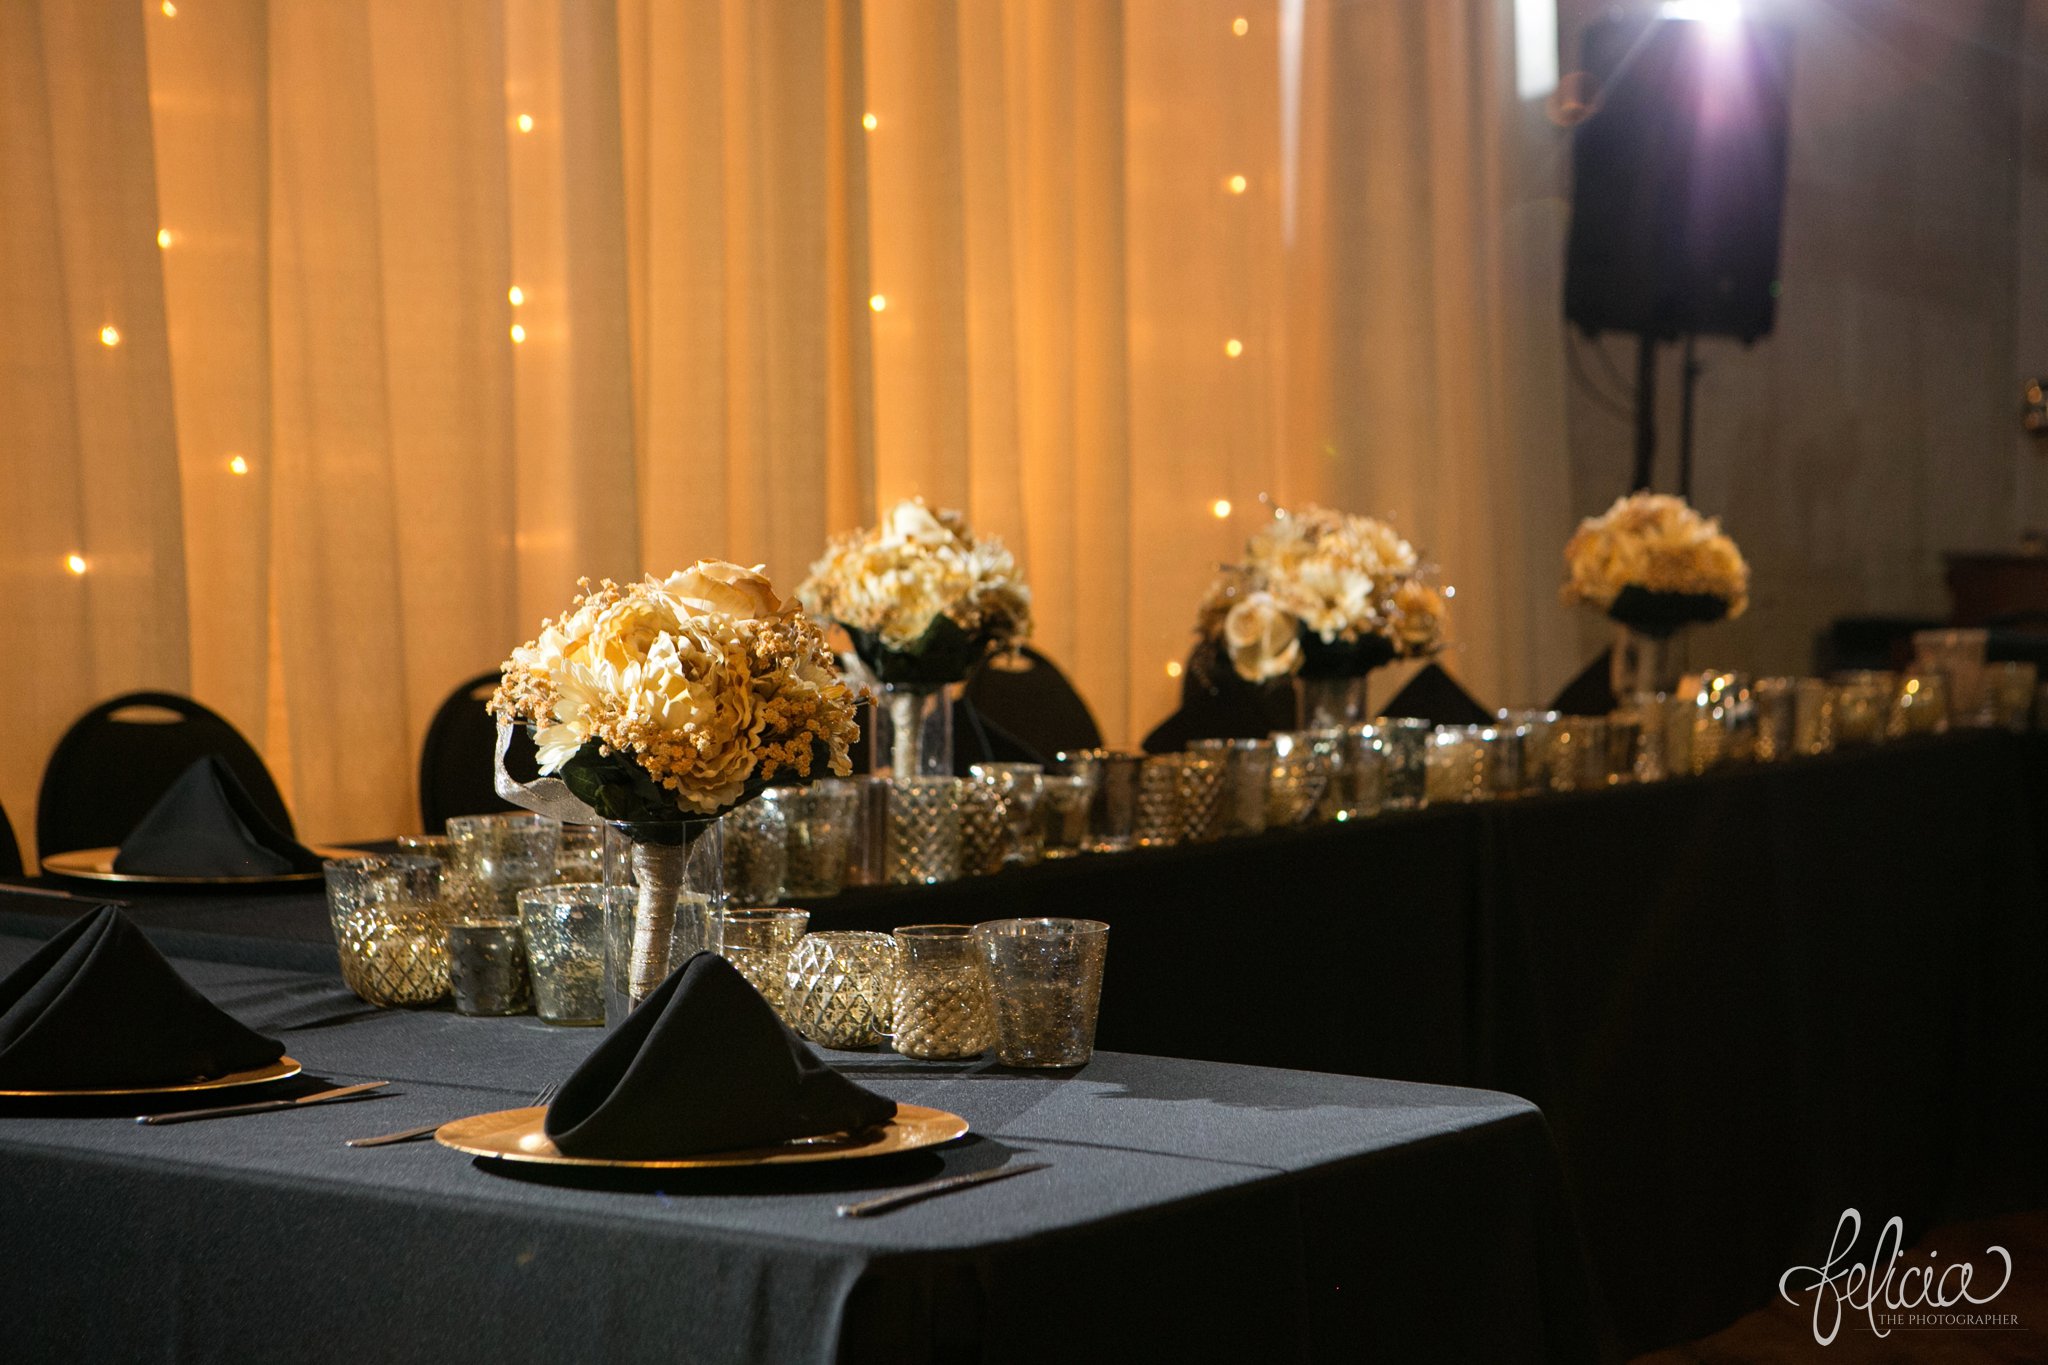 weddings | wedding photos | wedding photography | images by feliciathephotographer.com | St. Therese Catholic Church | Kansas City | downtown | The Terrace on Grand | reception venue | black and gold | silver tableware | centerpieces | white lights 